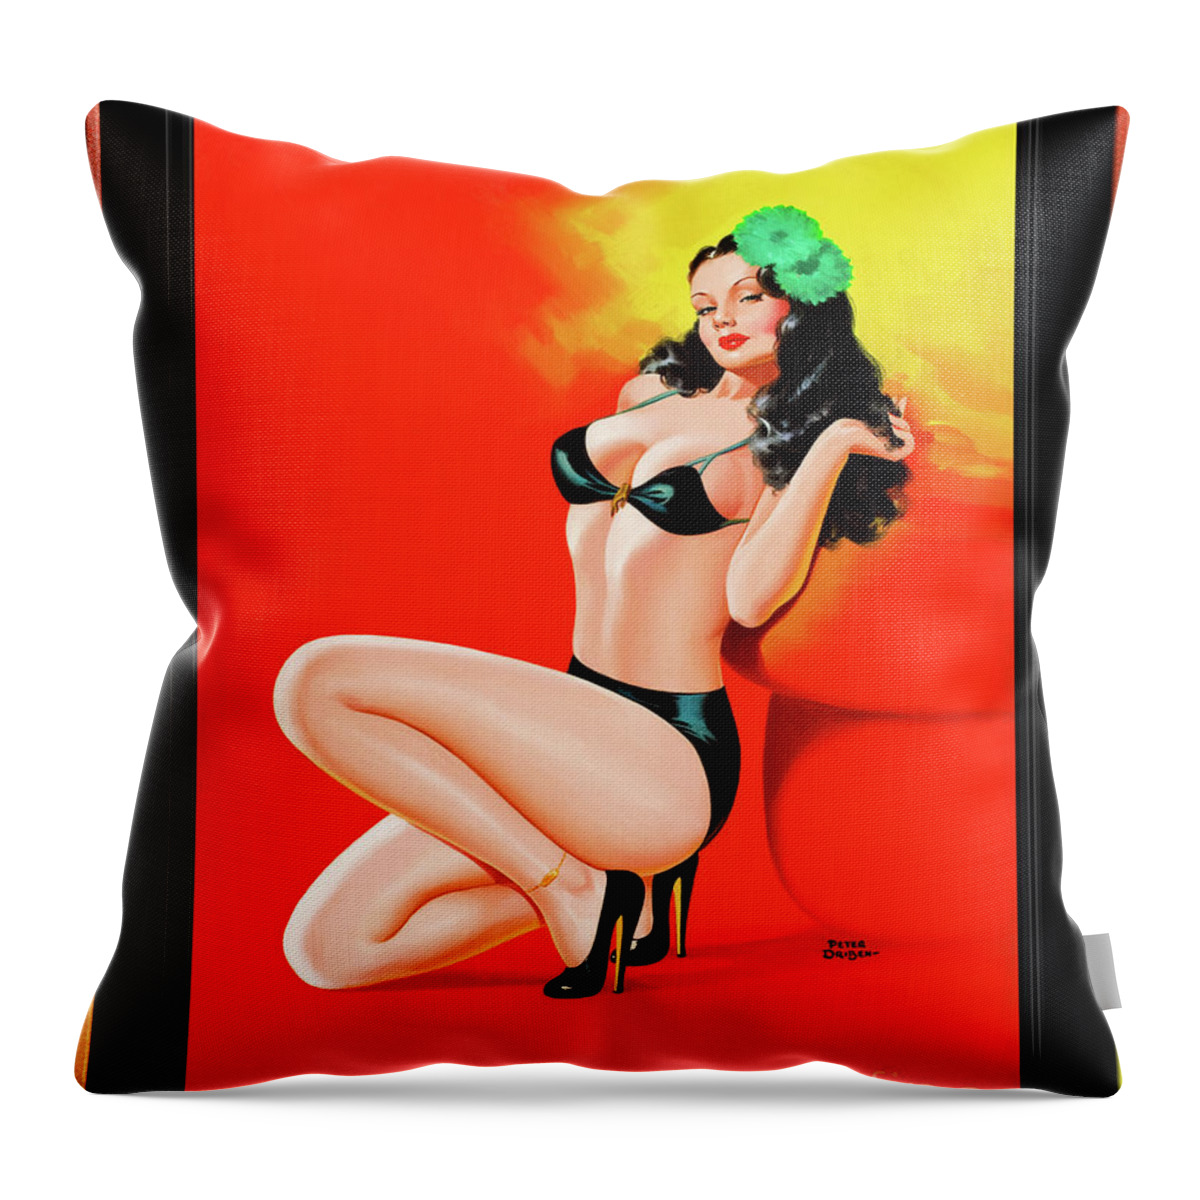 Too Hot To Touch Throw Pillow featuring the painting Too Hot To Touch by Peter Driben Vintage Pin-Up Girl Art by Rolando Burbon